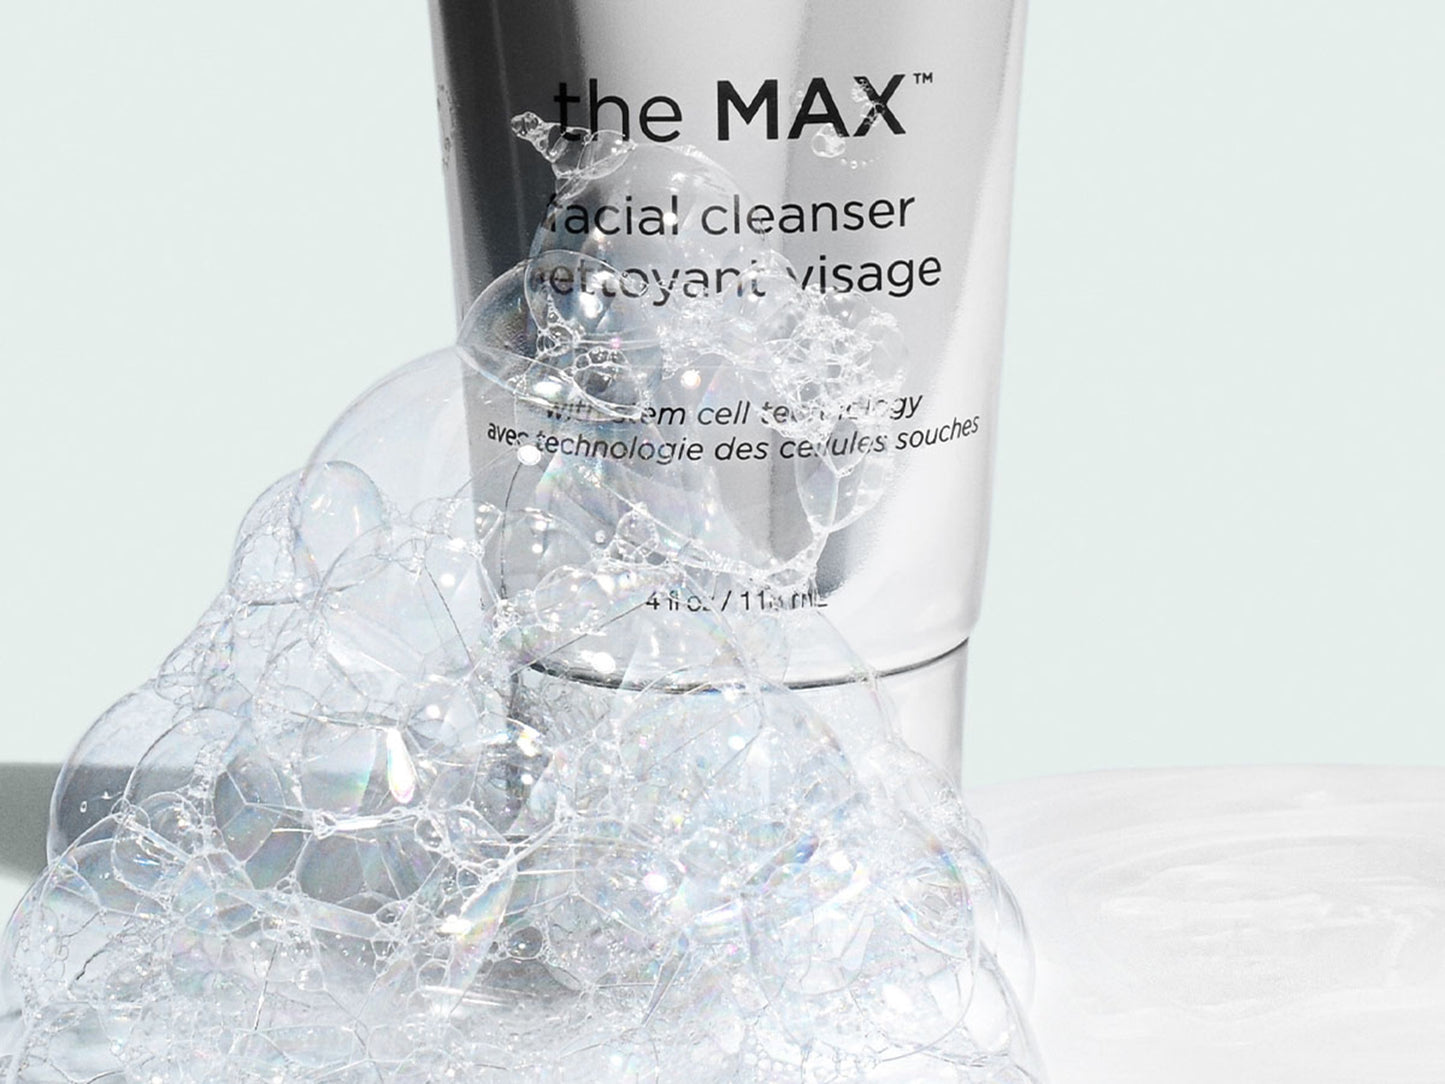 THE MAX - Facial Cleanser